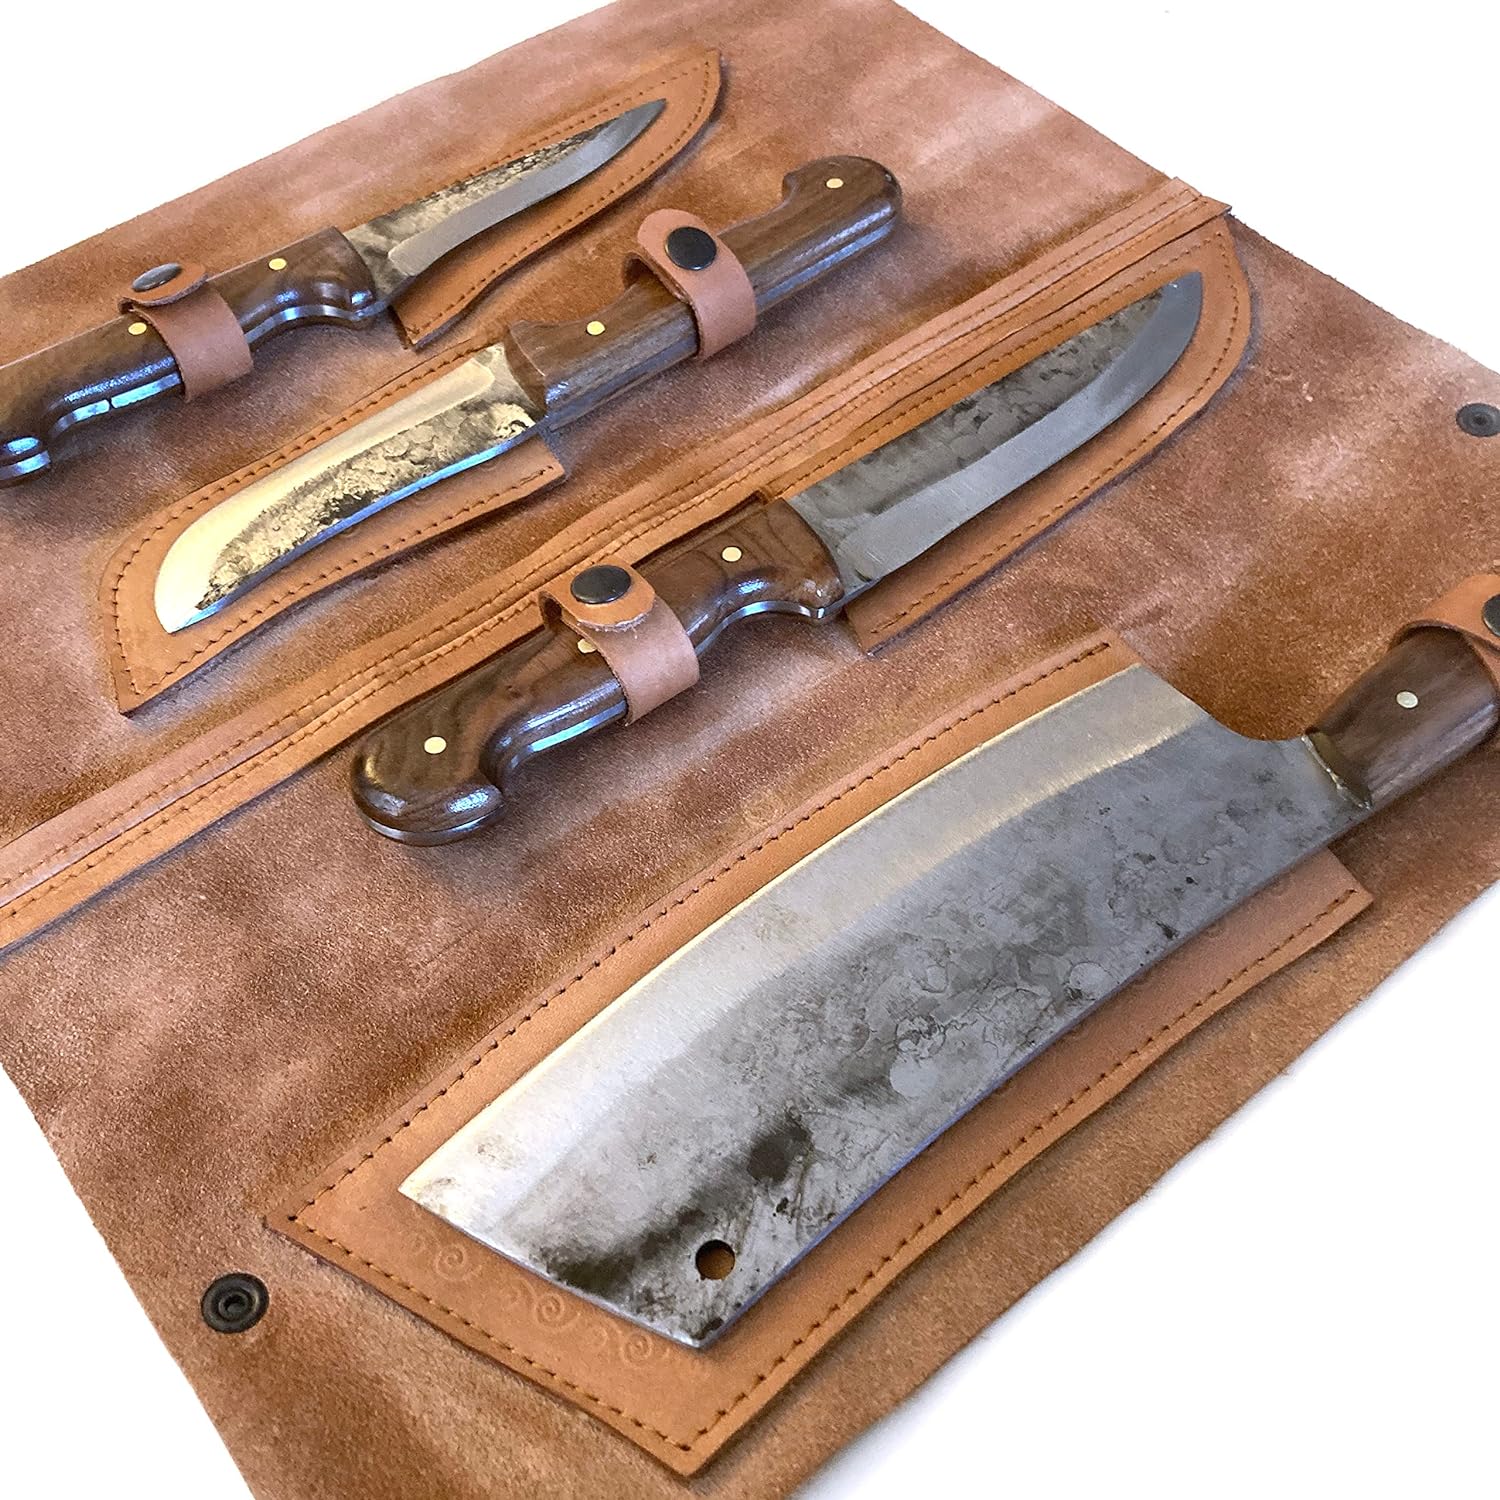 OHIY Butcher Series 4-Piece Hand Forged Knife and Cleaver Set with Genuine  Leather Sheath, 5160 High Carbon Steel Blades - OHIY